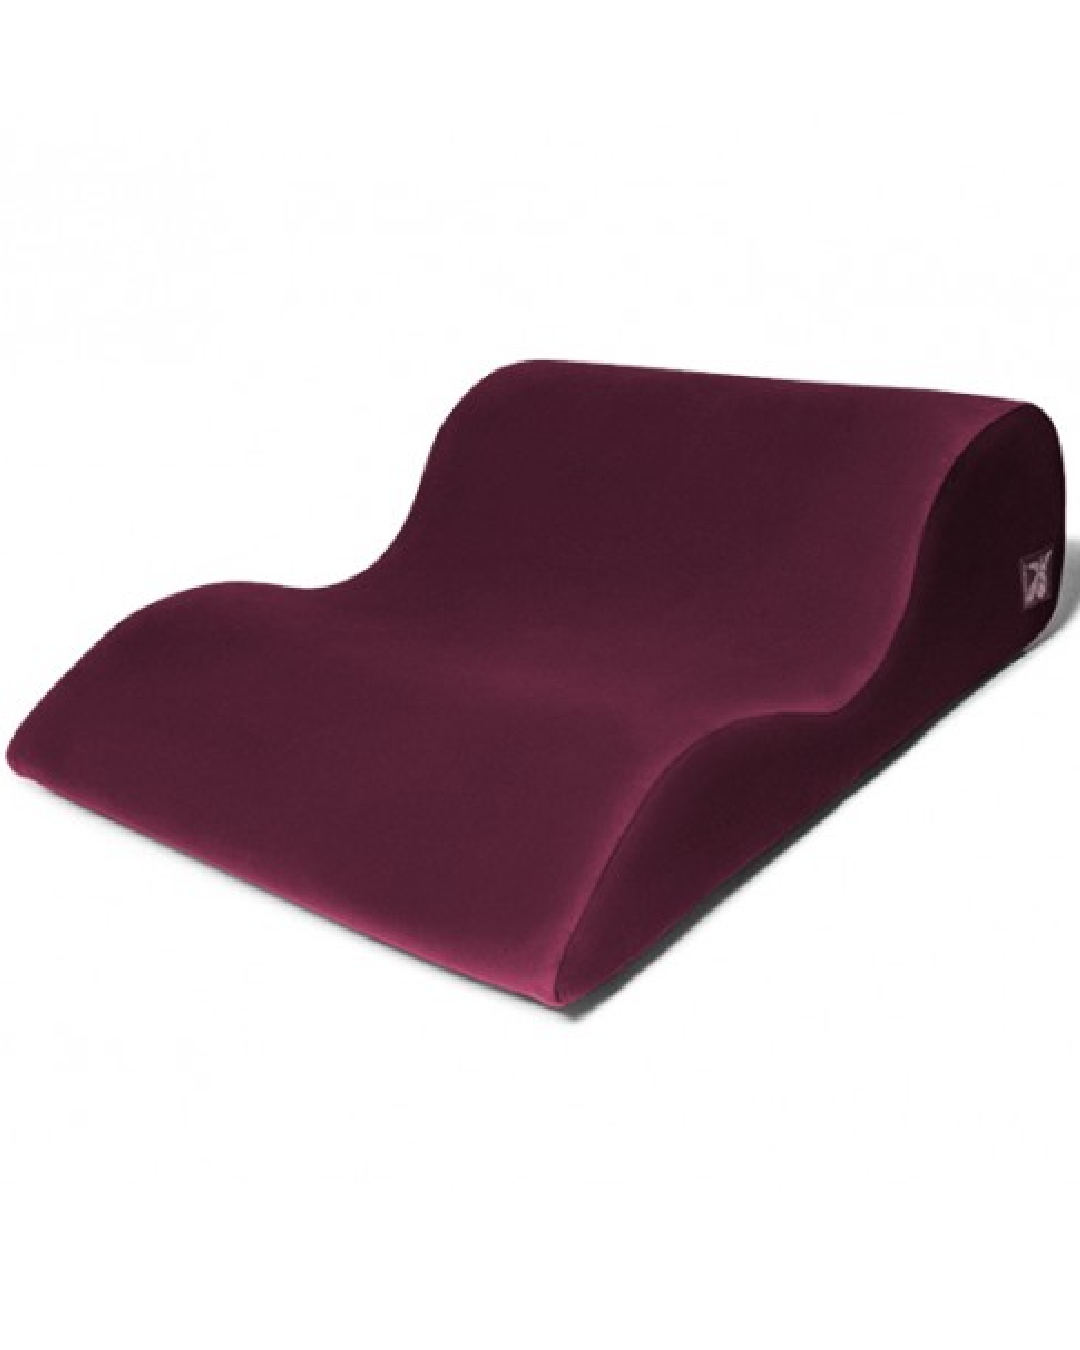 Liberator Hipster Sex Positioning Cushion - Red